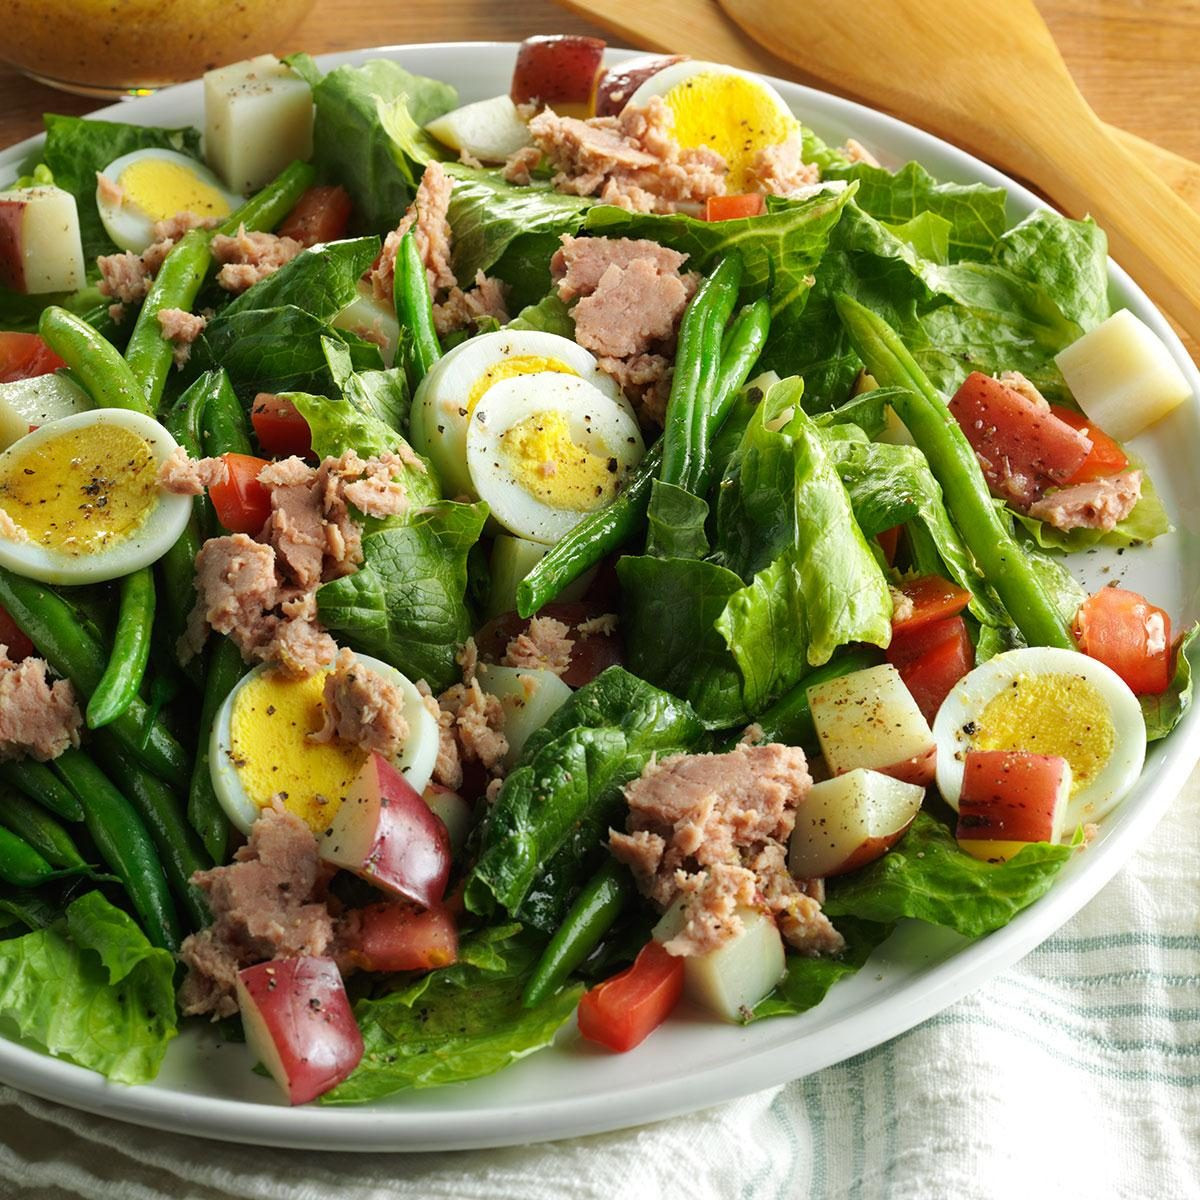 Salad Recipes For Weight Loss
 28 Healthy Salads for Weight Loss